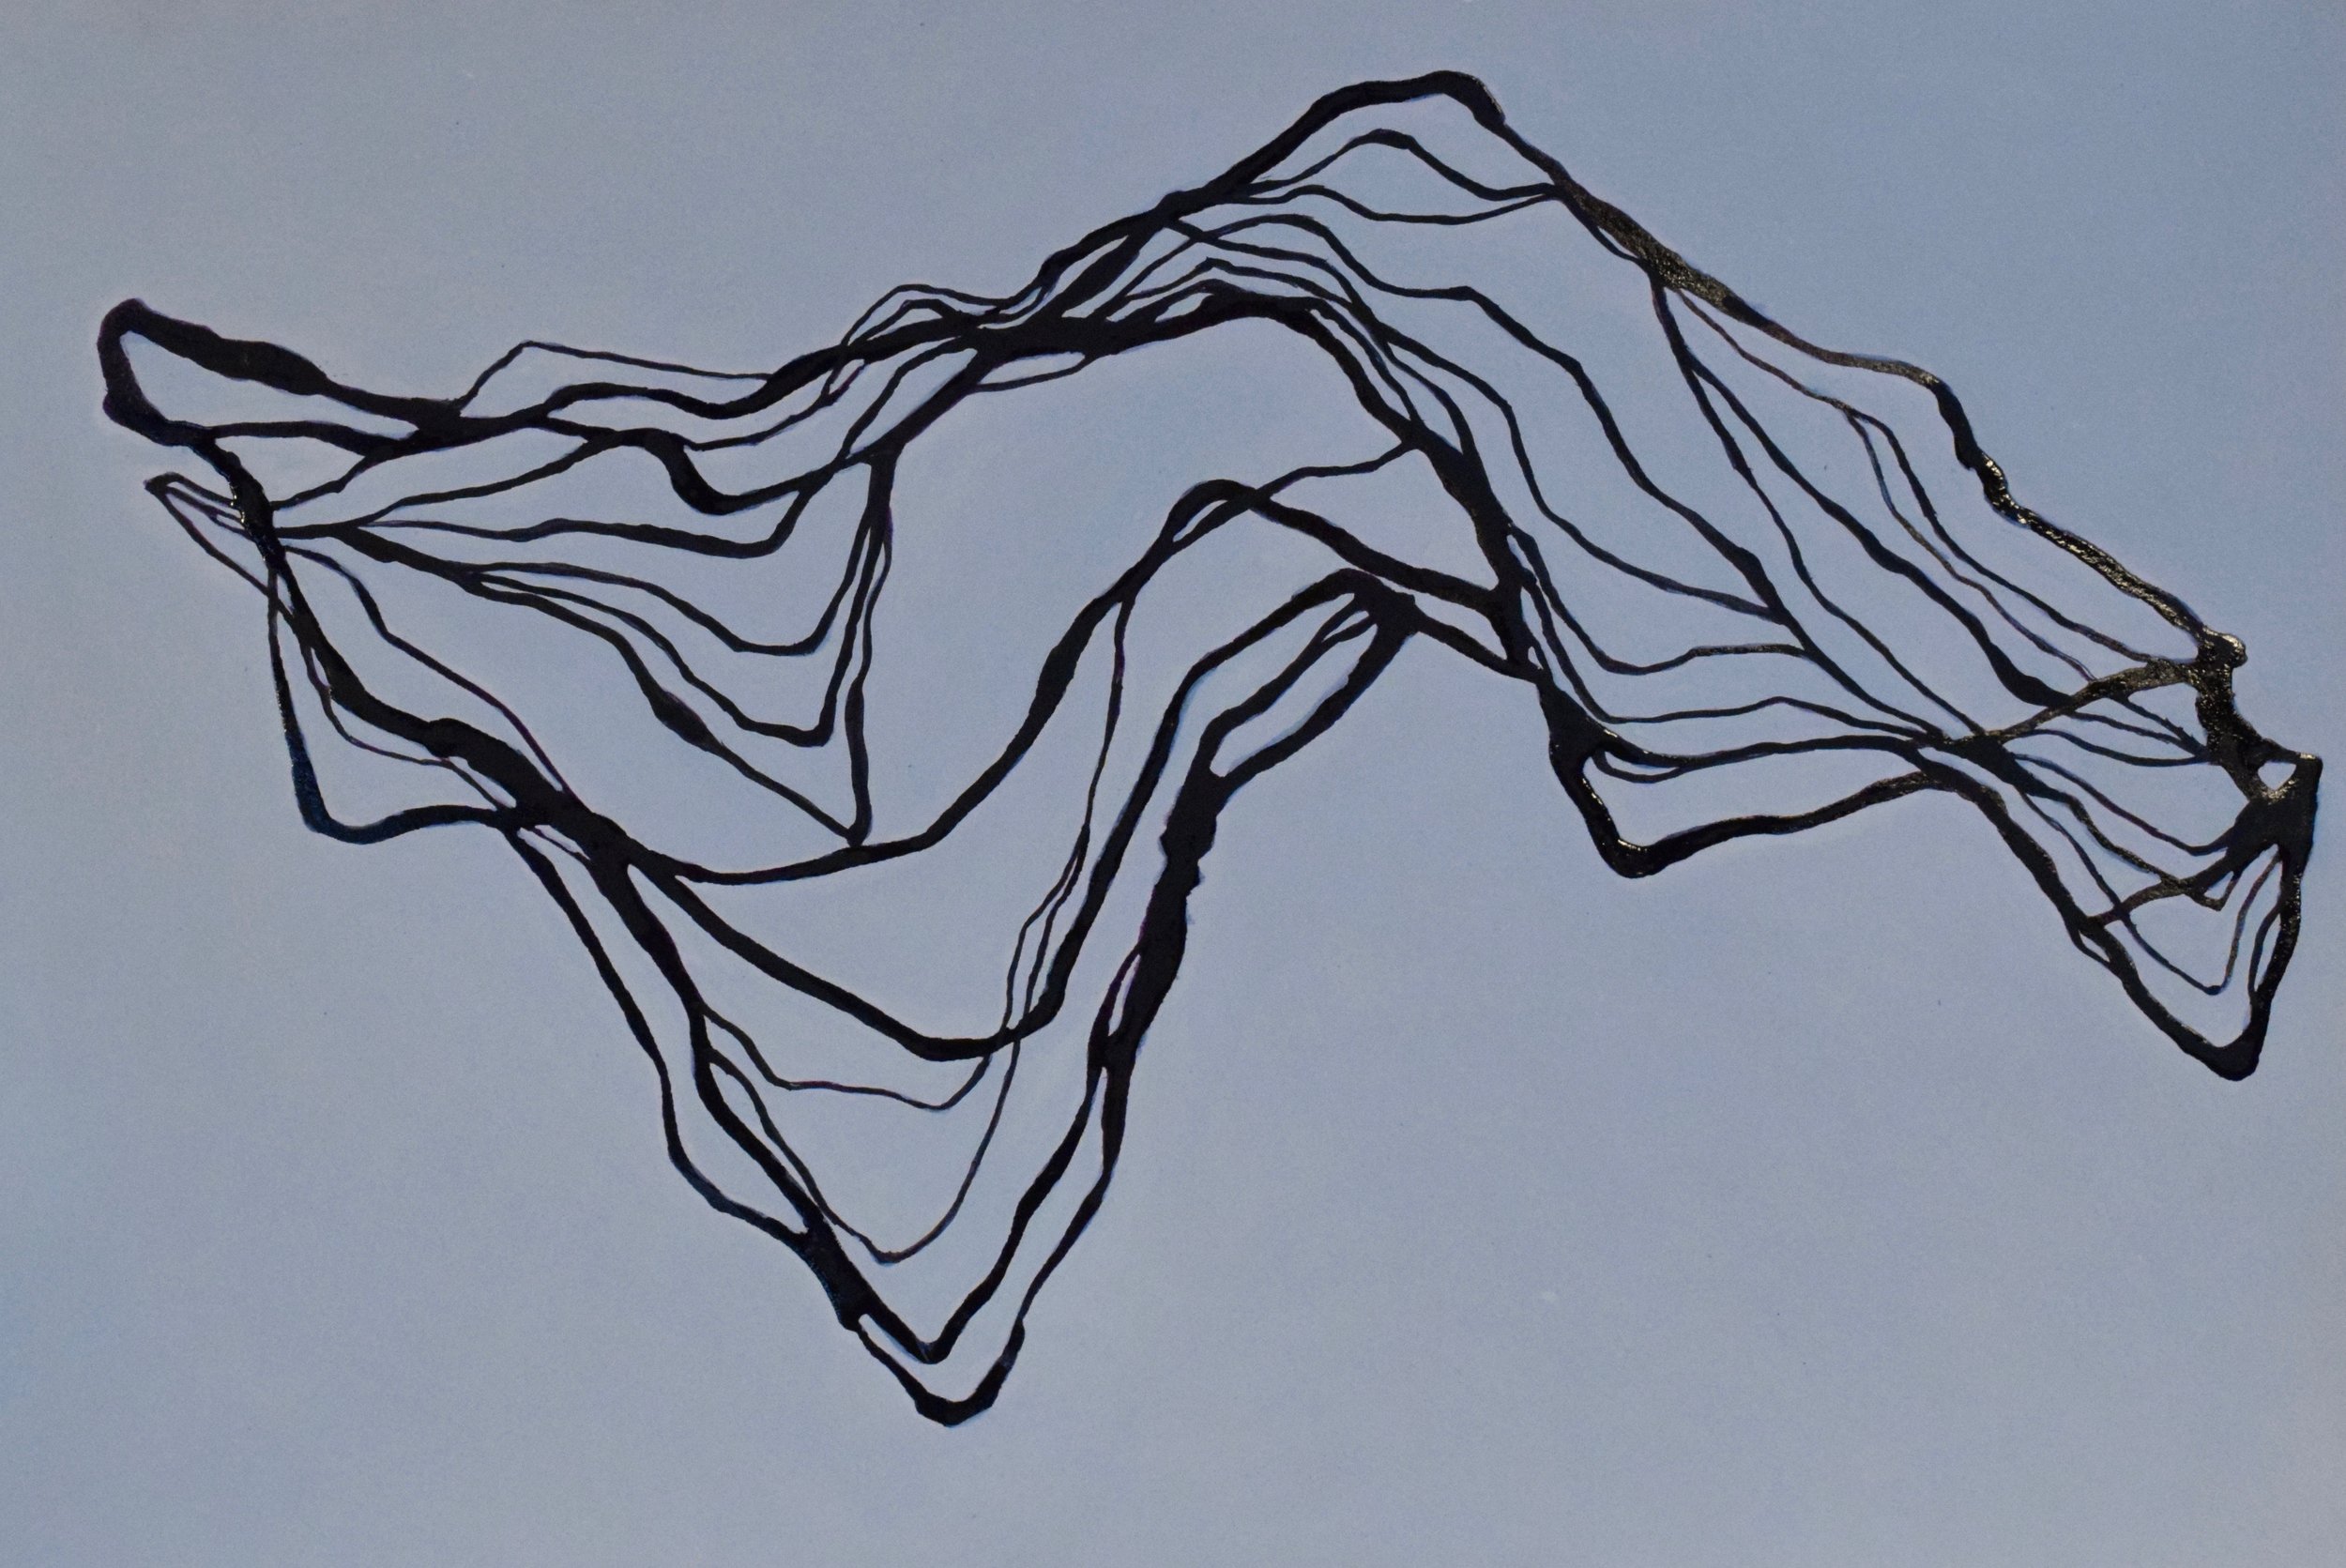 Untitled, 2011, gouache on paper, 21 x 17 in, $650